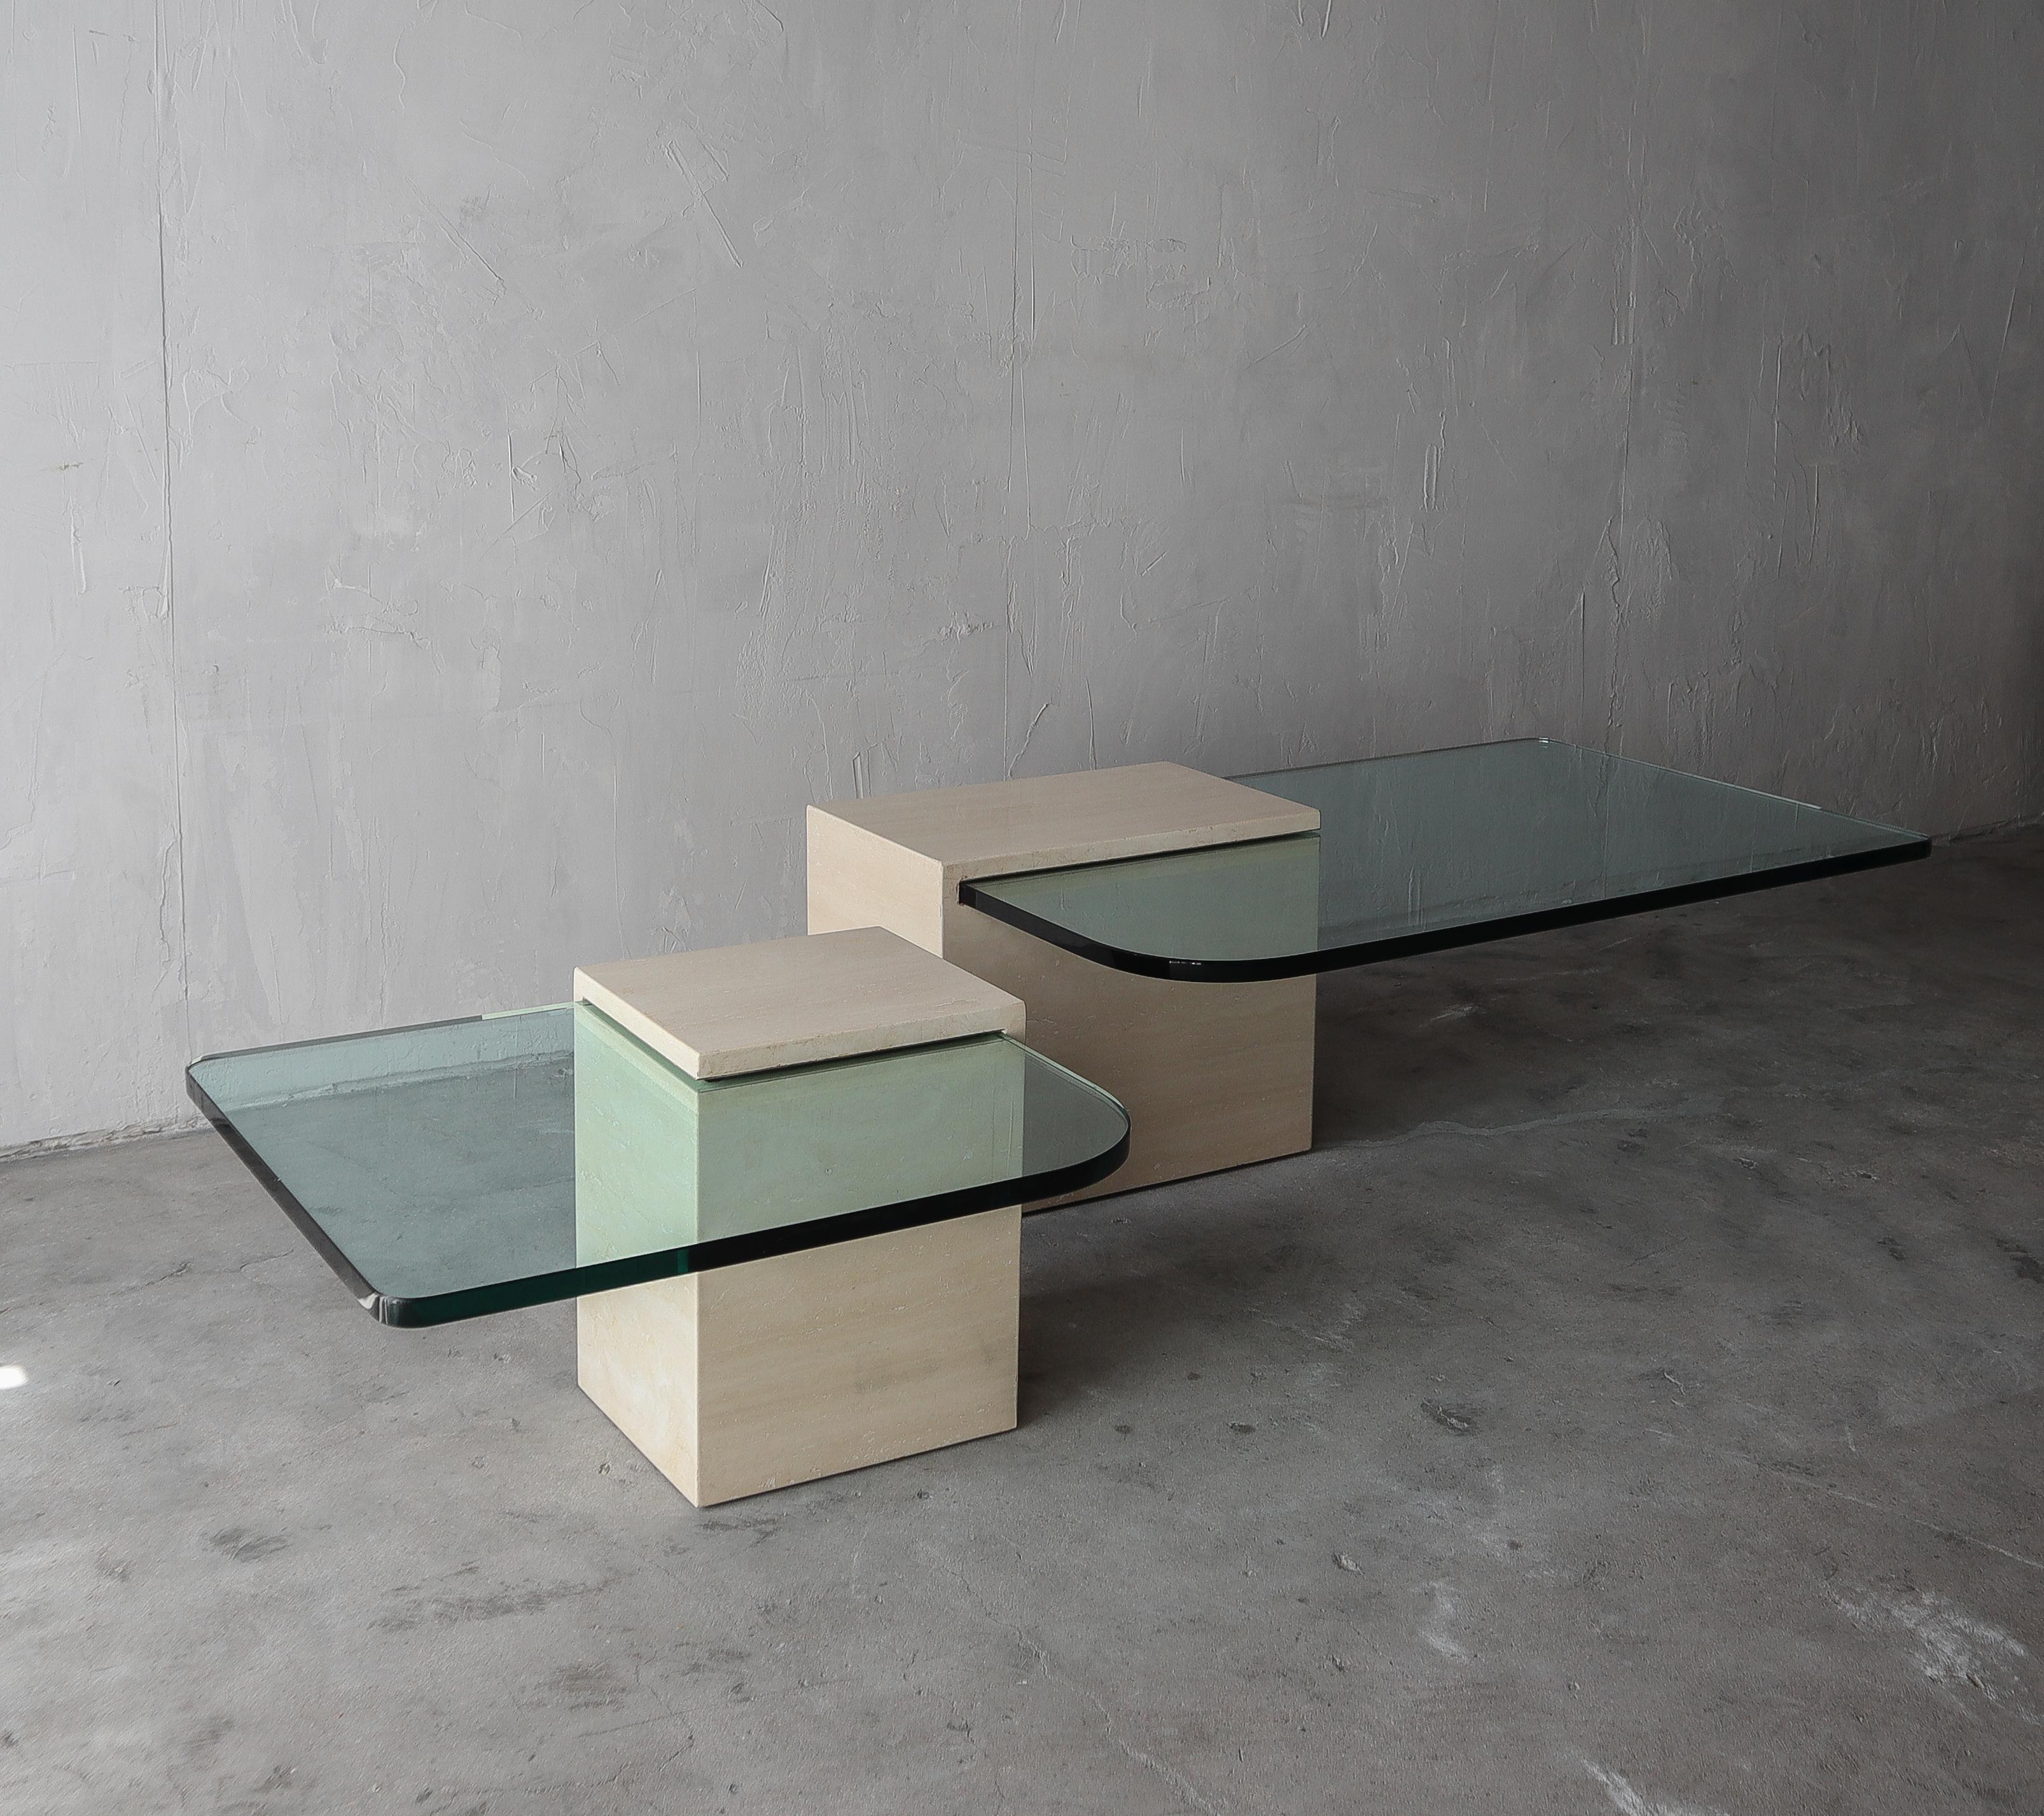 A gorgeous pair of travertine and glass coffee tables. A highly versatile duo which can be arranged in a multitude of configurations. They can be used together as a bunching coffee table, or separately as a coffee table and side table. These tables